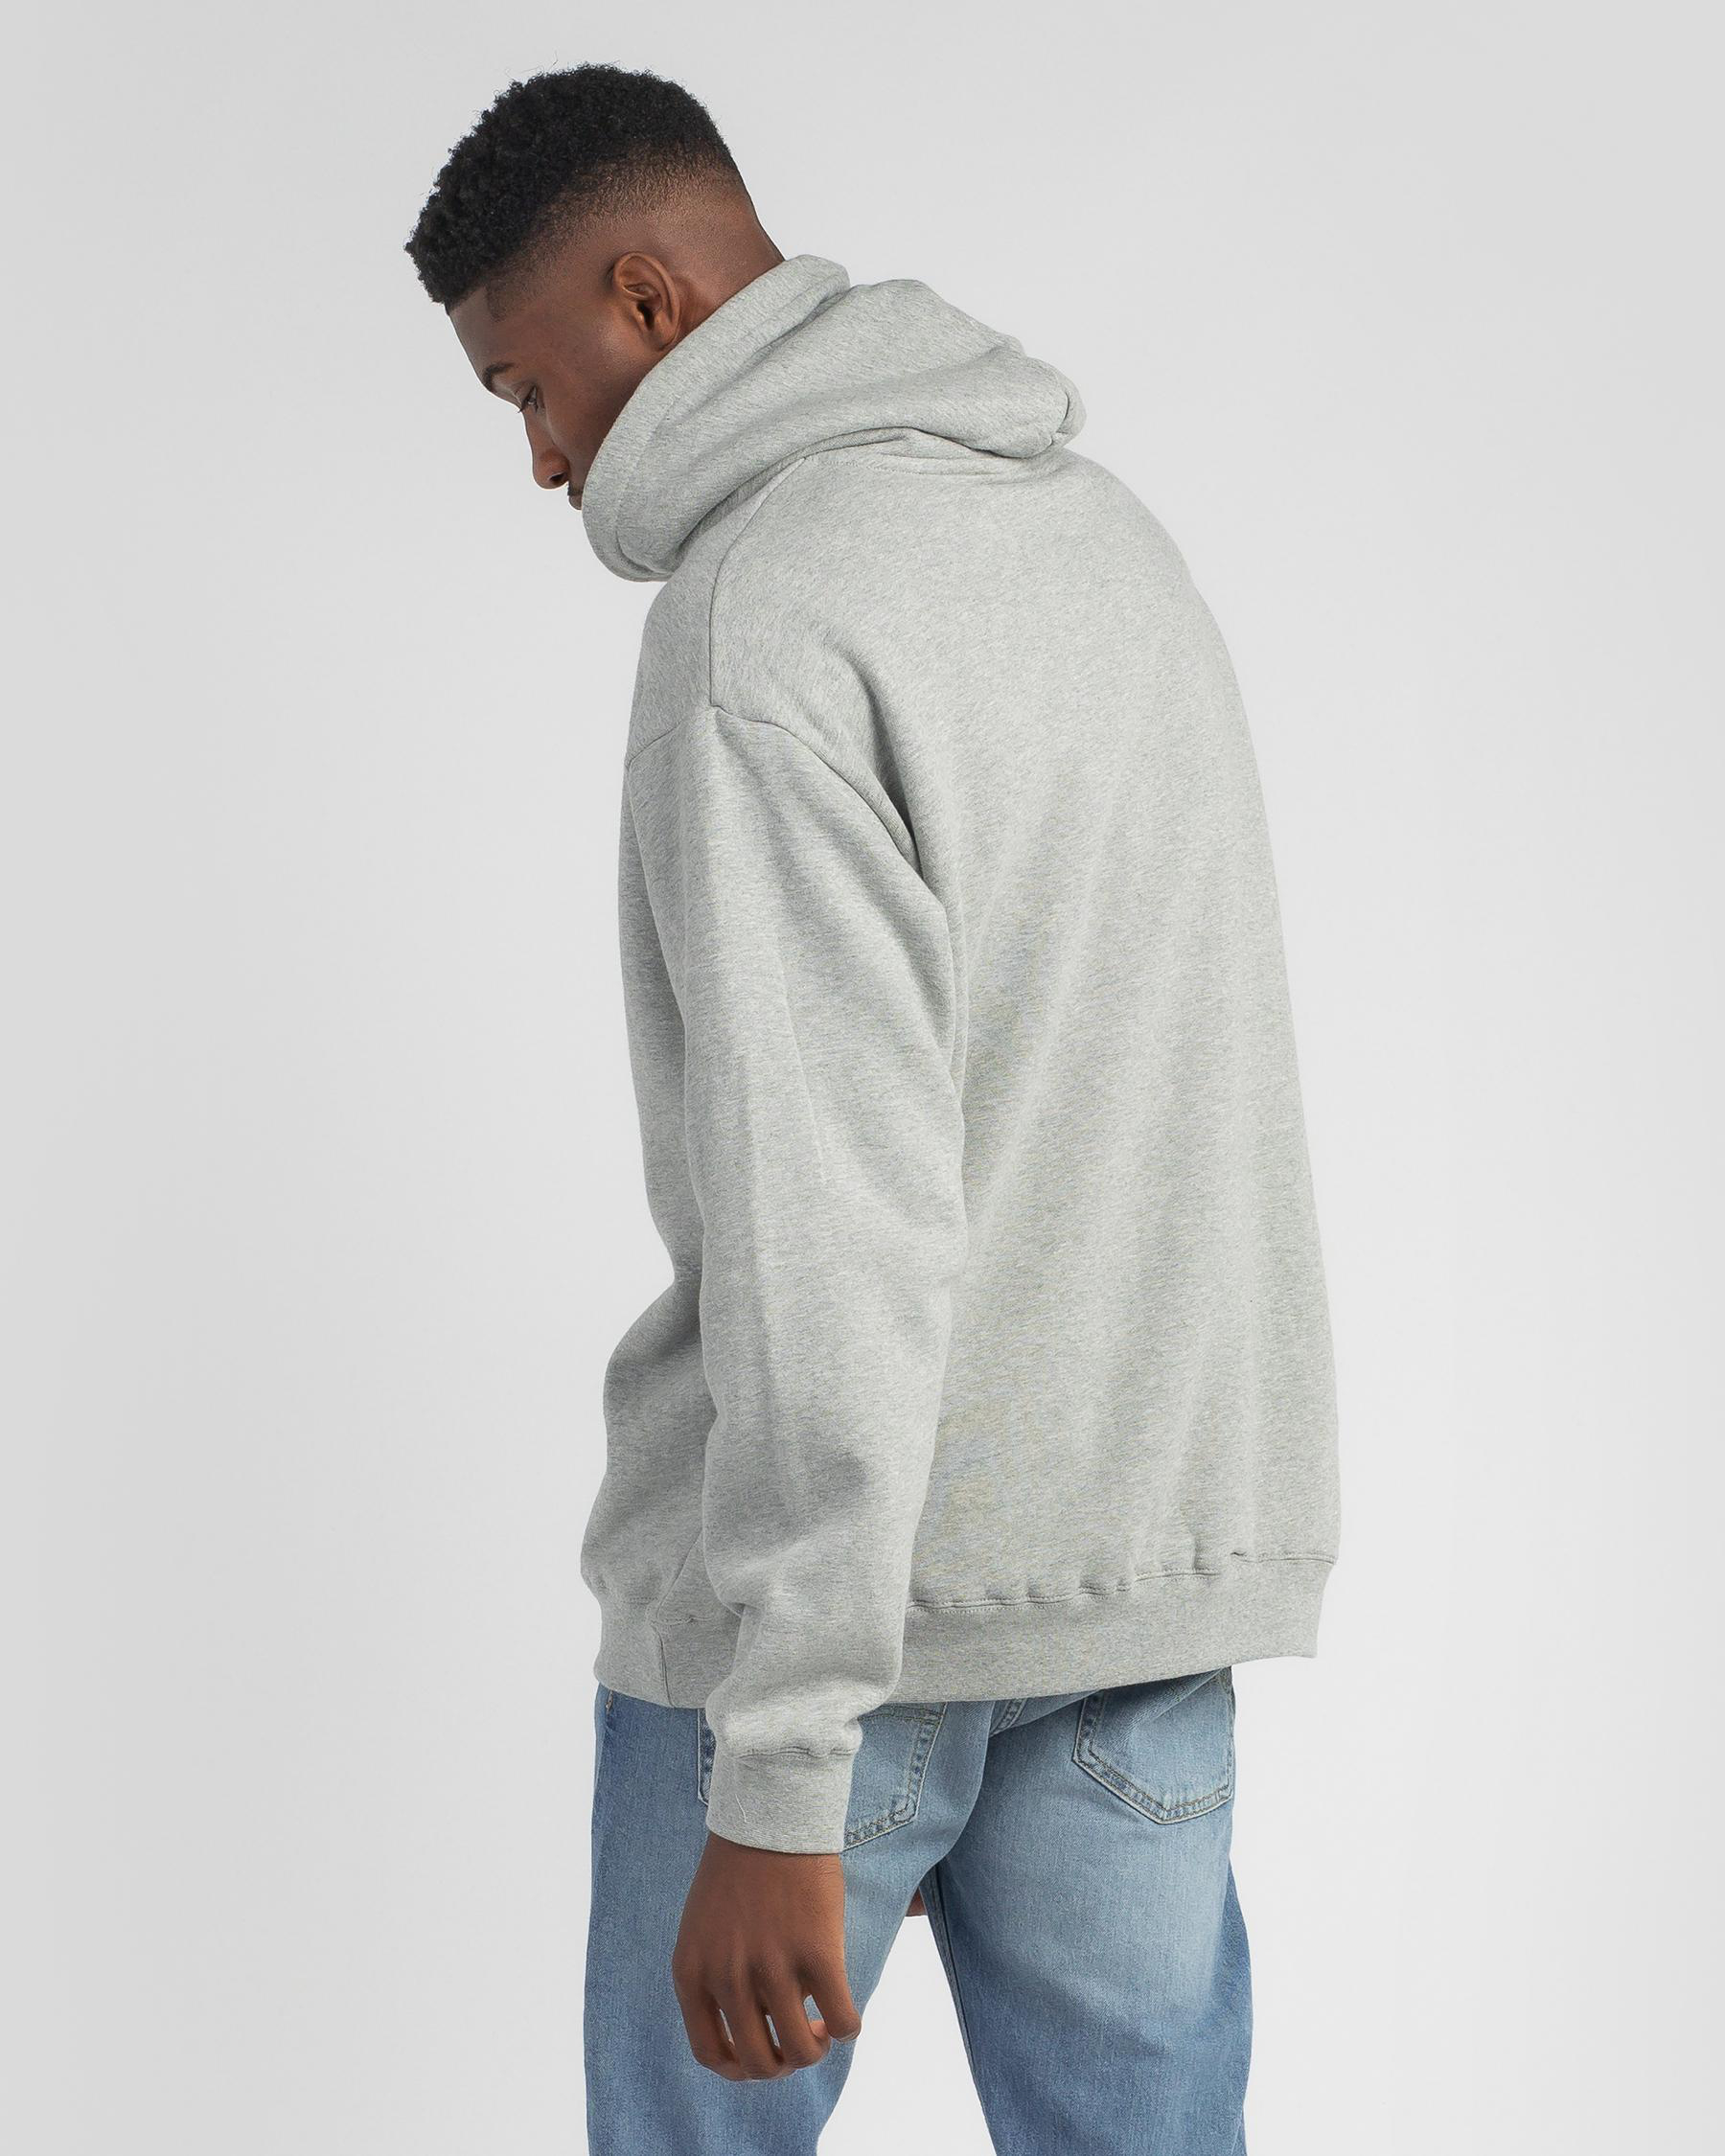 Stussy City Circle Hoodie In True Grey Marle - Fast Shipping & Easy ...